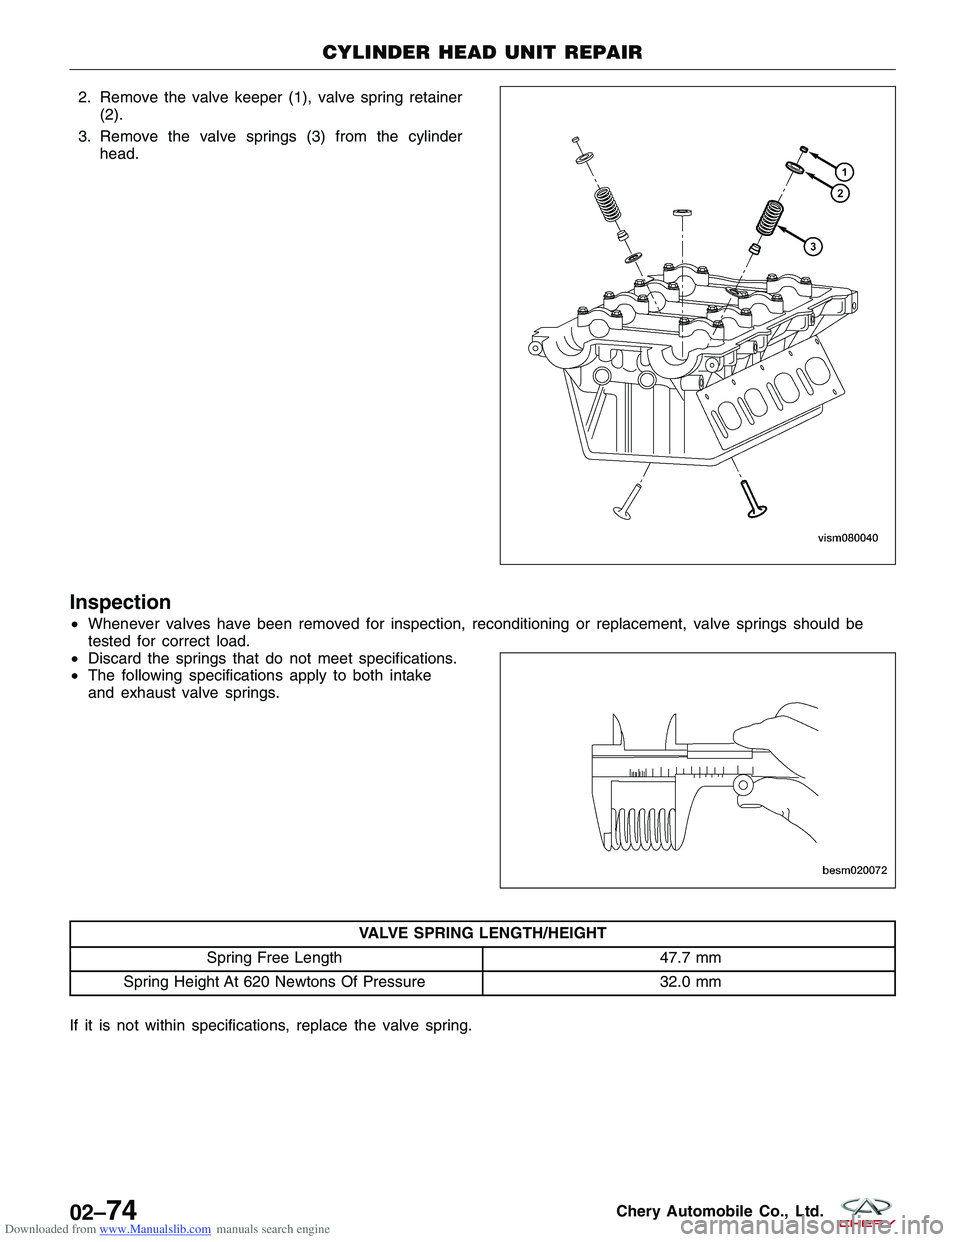 CHERY TIGGO 2009  Service Repair Manual Downloaded from www.Manualslib.com manuals search engine 2. Remove the valve keeper (1), valve spring retainer(2).
3. Remove the valve springs (3) from the cylinder head.
Inspection
•Whenever valves